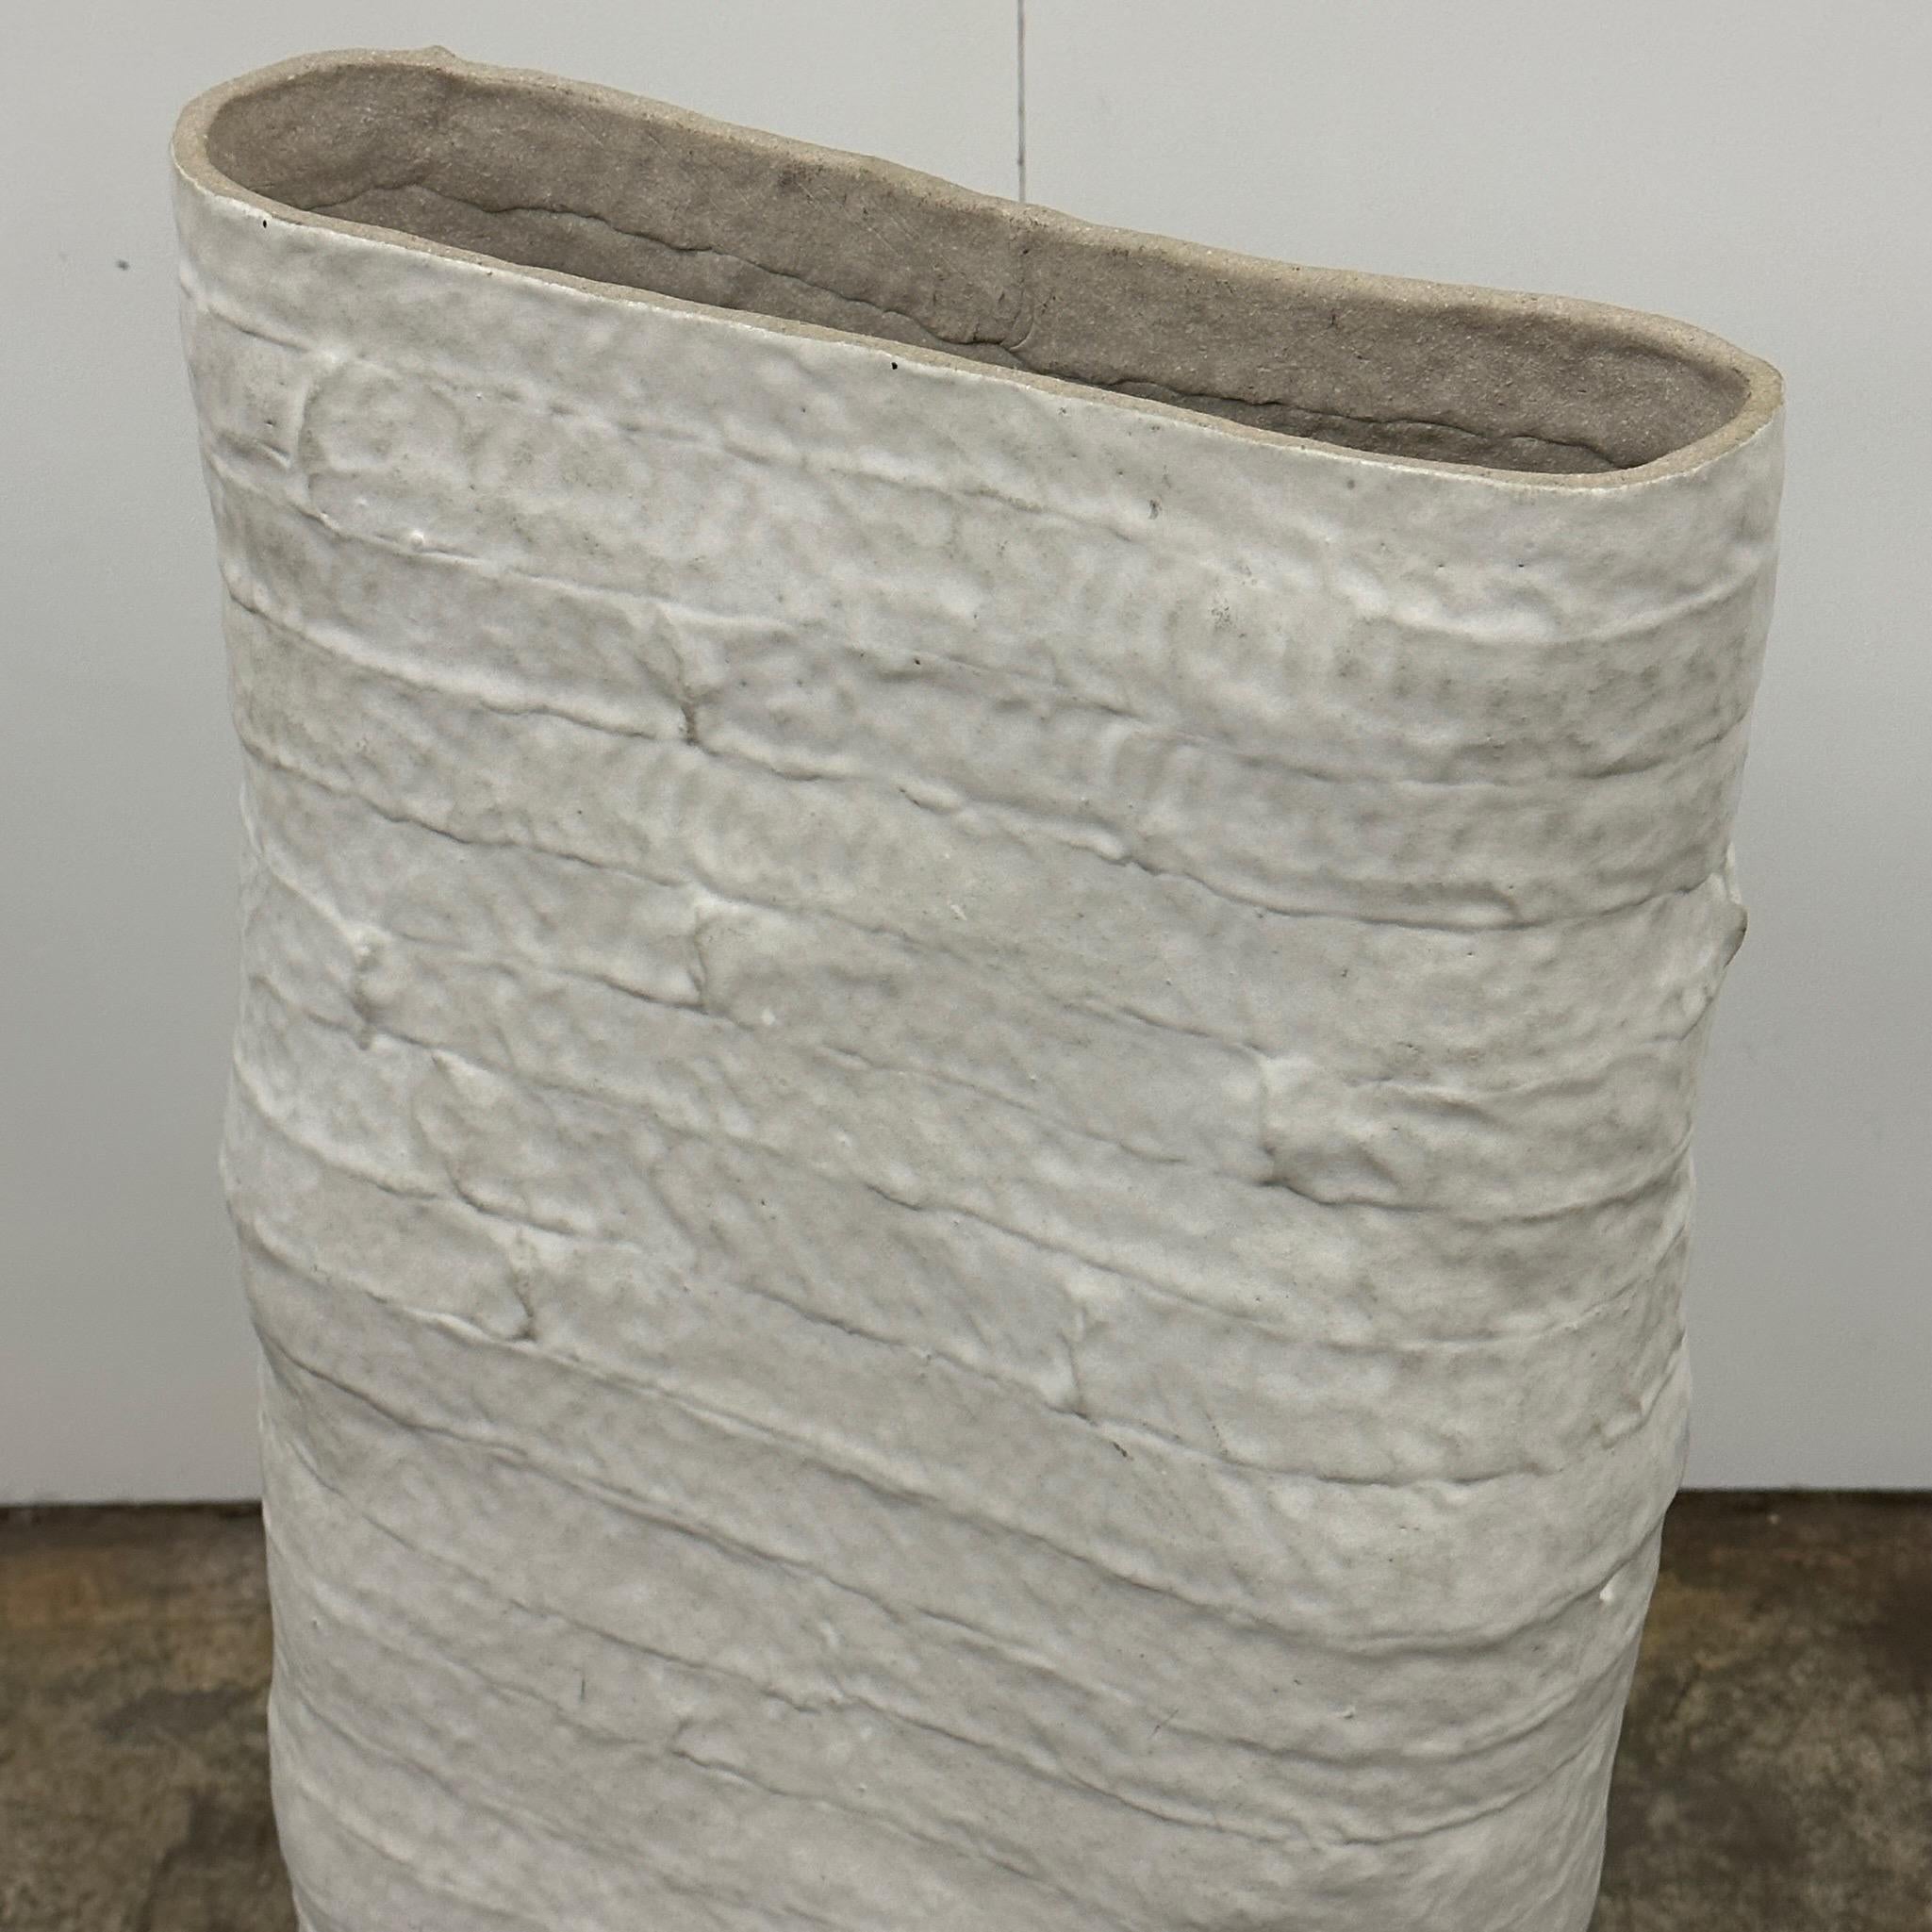 c. Unknown. Coiled ceramic construction glazed white. Incredibly unique statement piece.